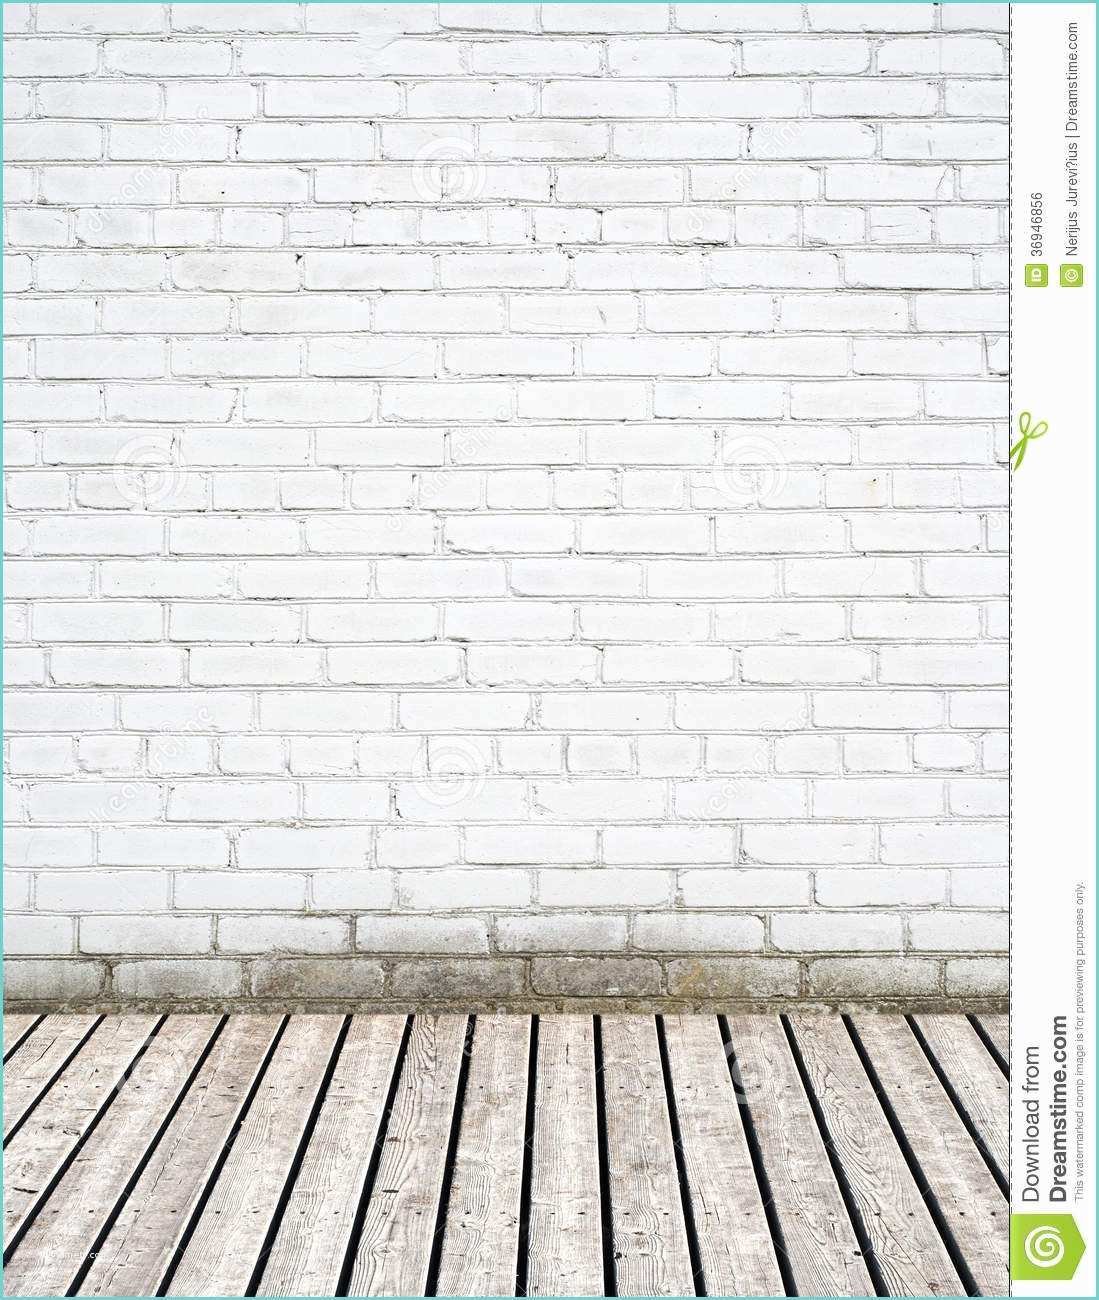 White Brick Wall and Floor White Brick Wall and Wooden Floor Stock Image